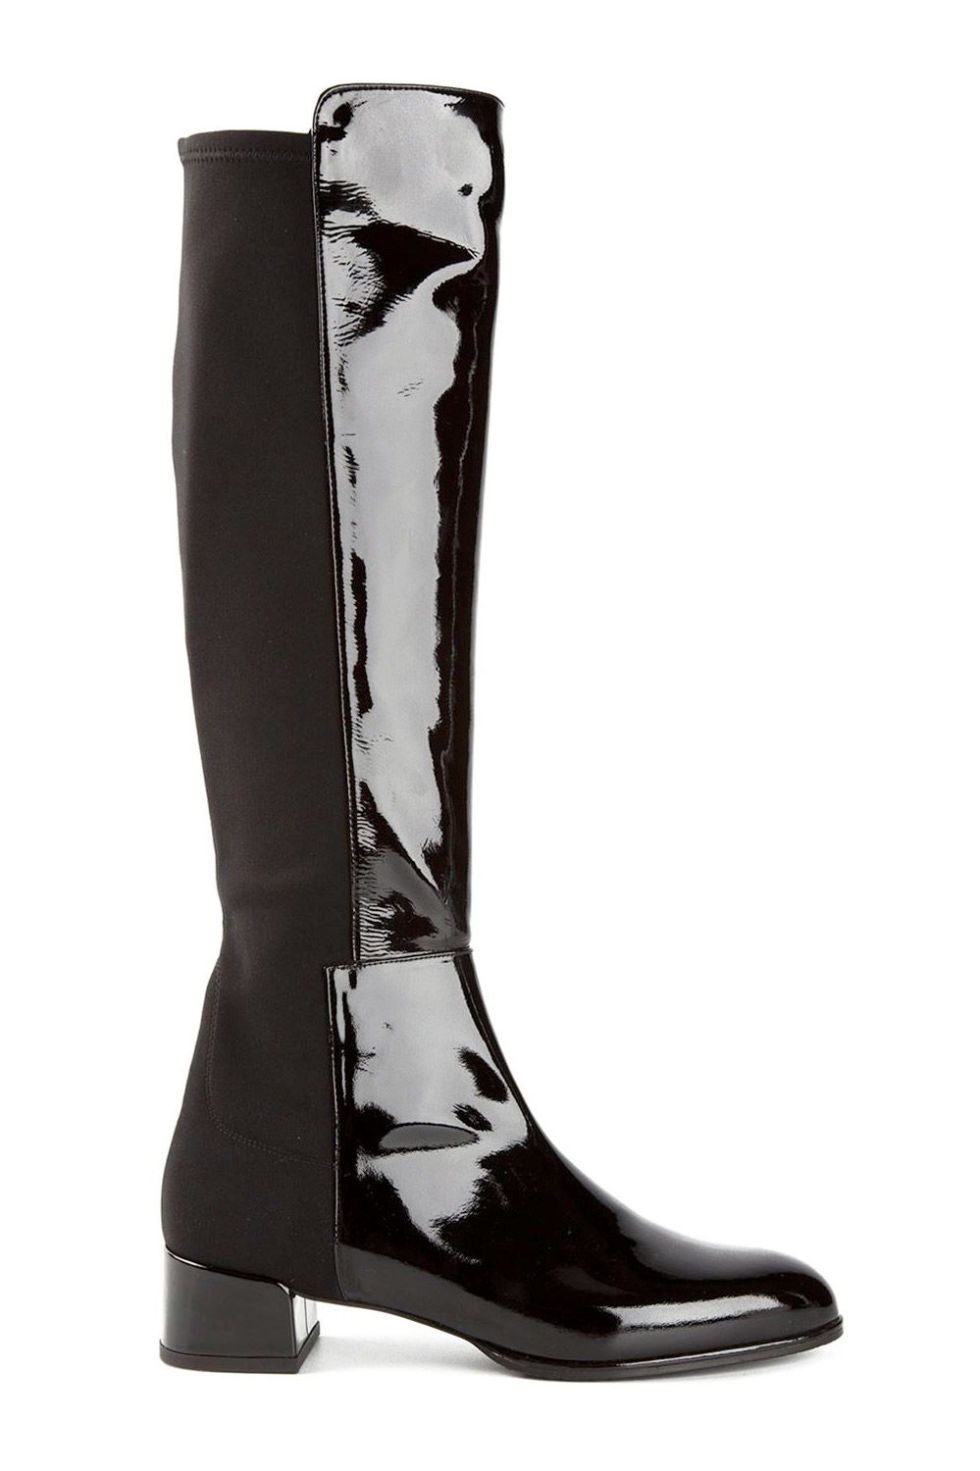 Boot, Riding boot, Knee-high boot, Black, Leather, Rain boot, Cowboy boot, Synthetic rubber, Snow boot, Motorcycle boot, 